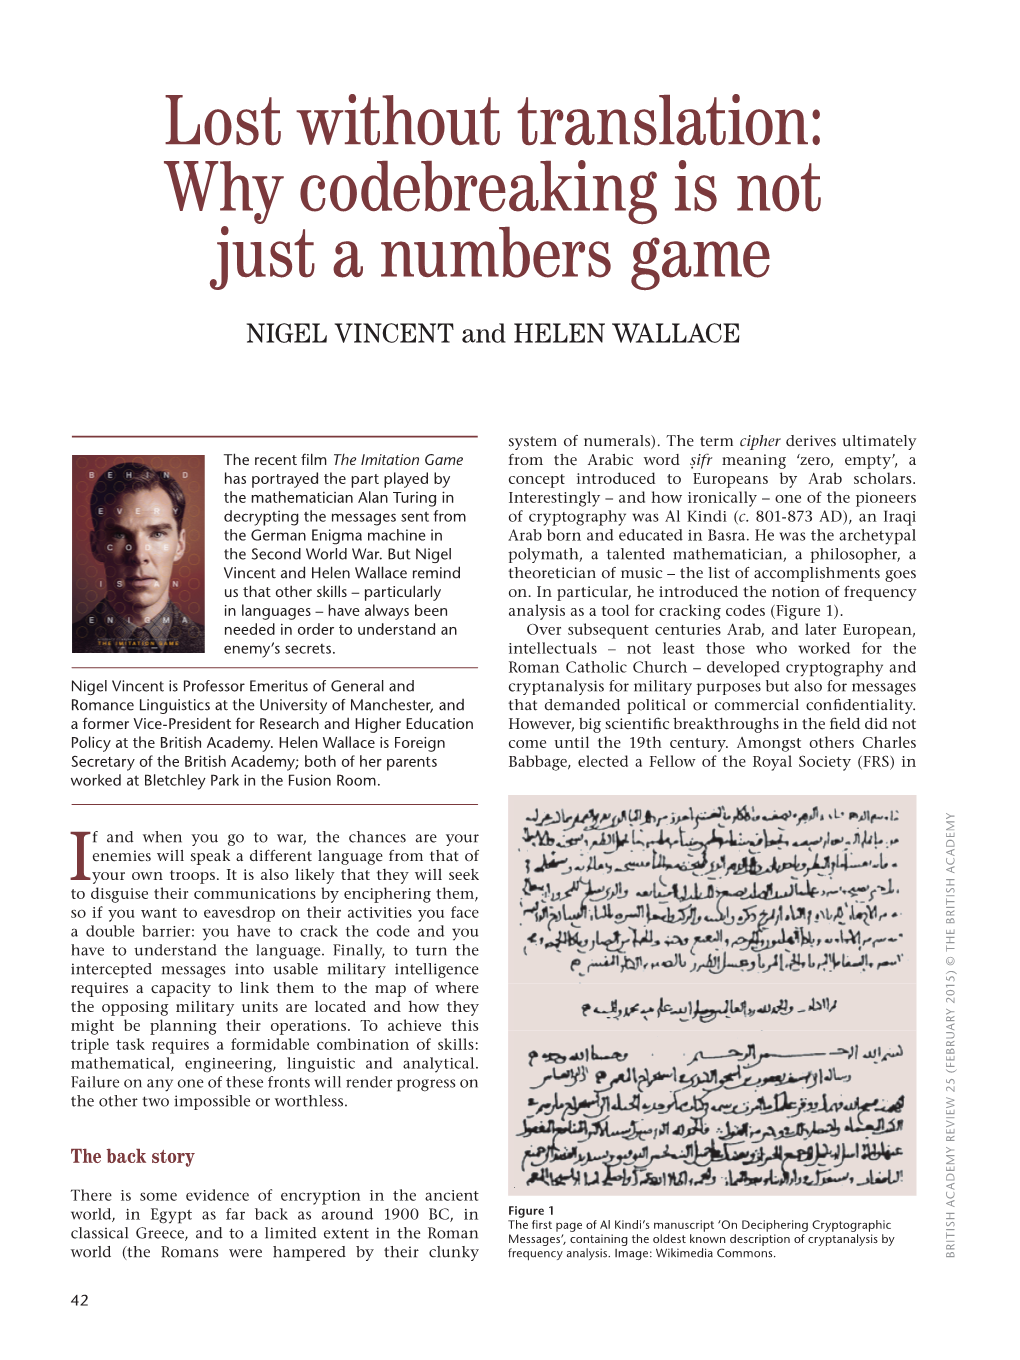 Lost Without Translation: Why Codebreaking Is Not Just a Numbers Game